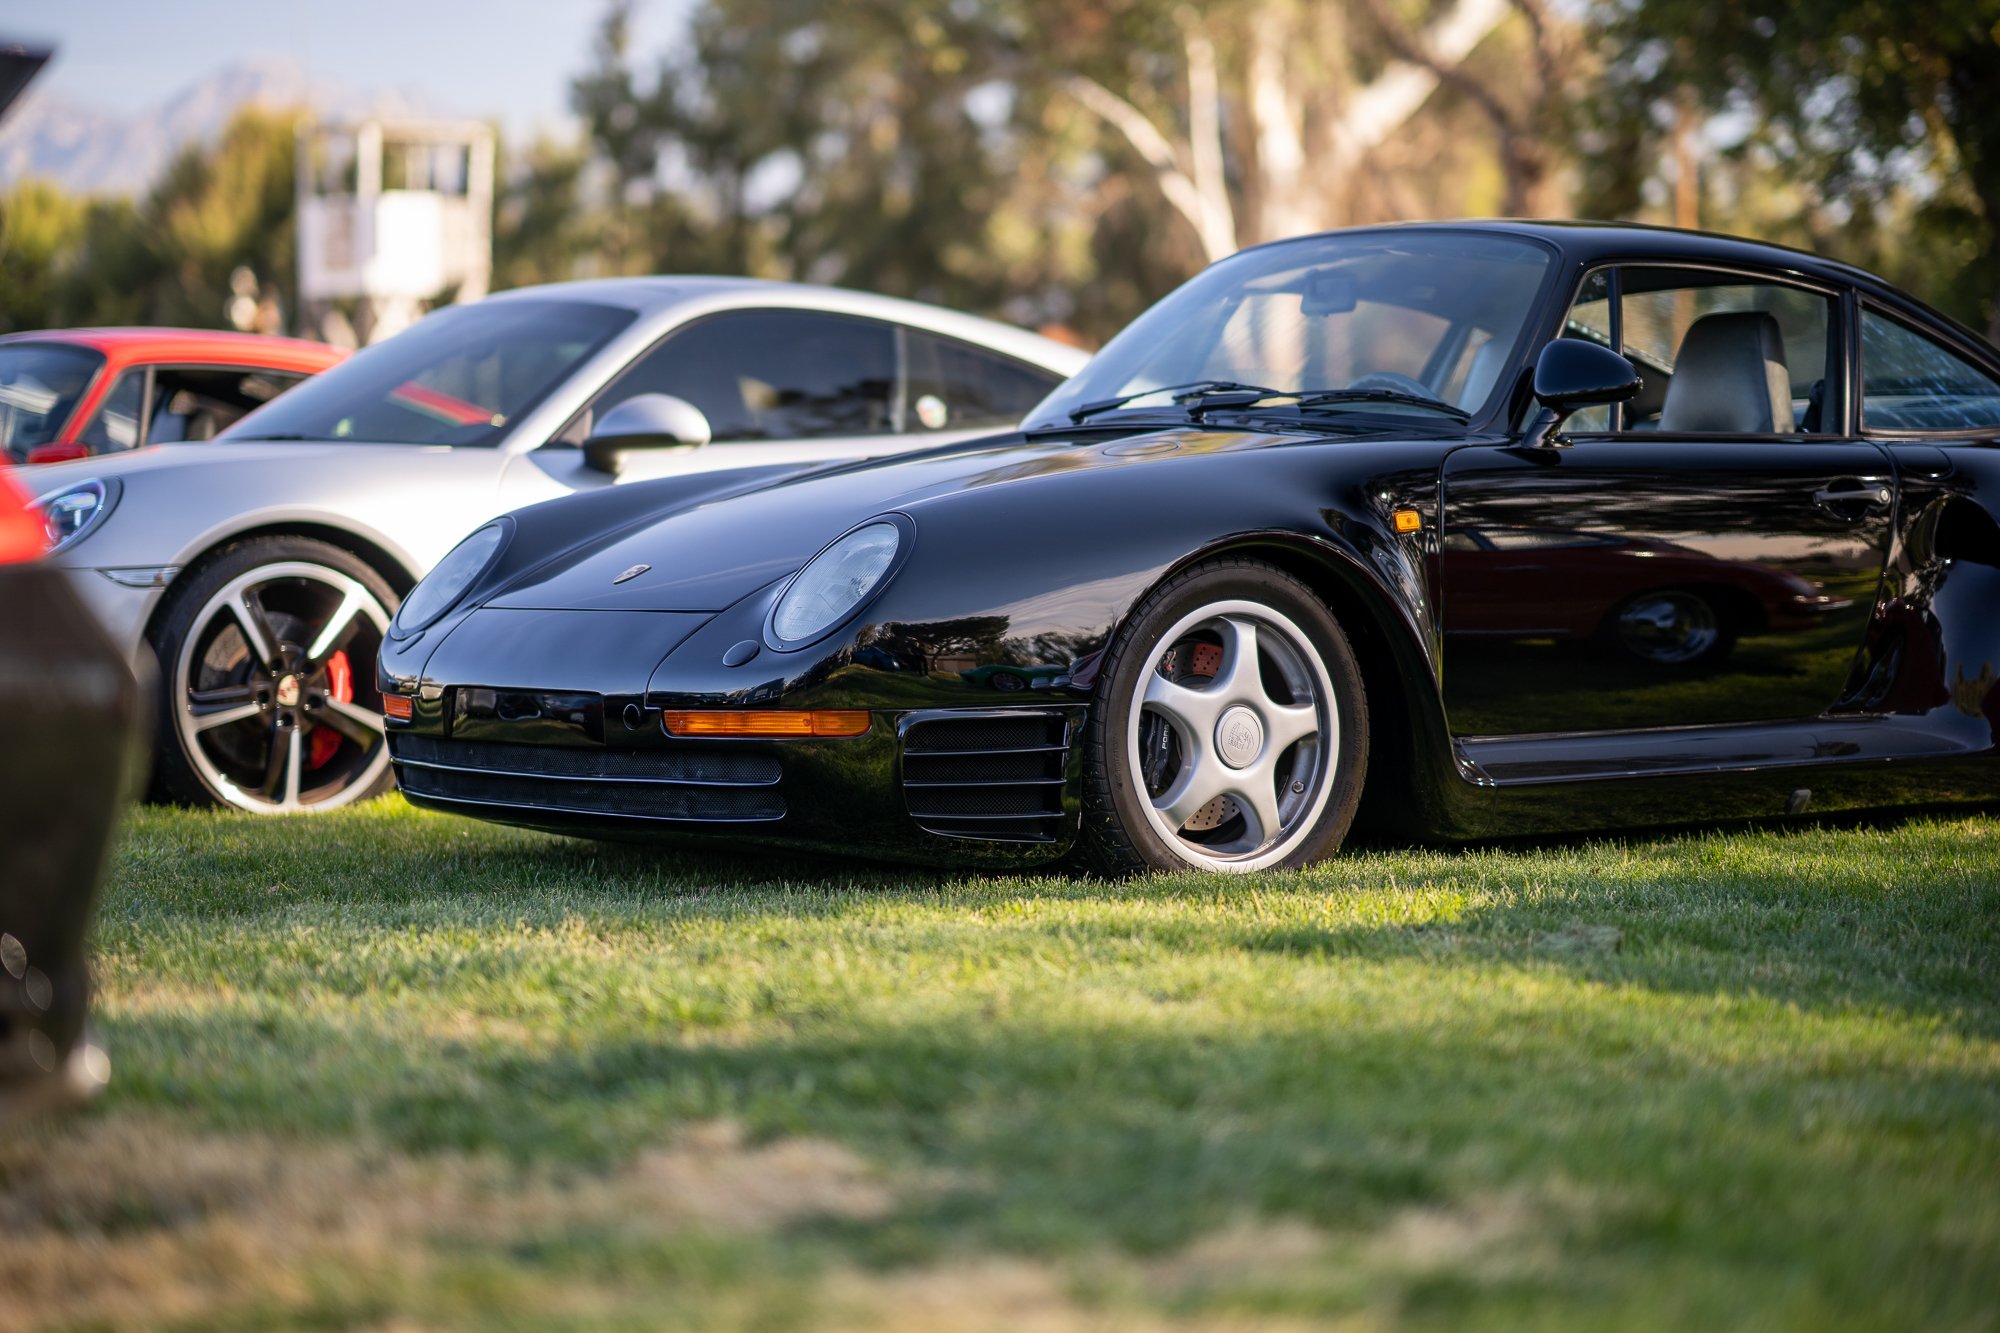 Black 959 at a car show in Los Angeles